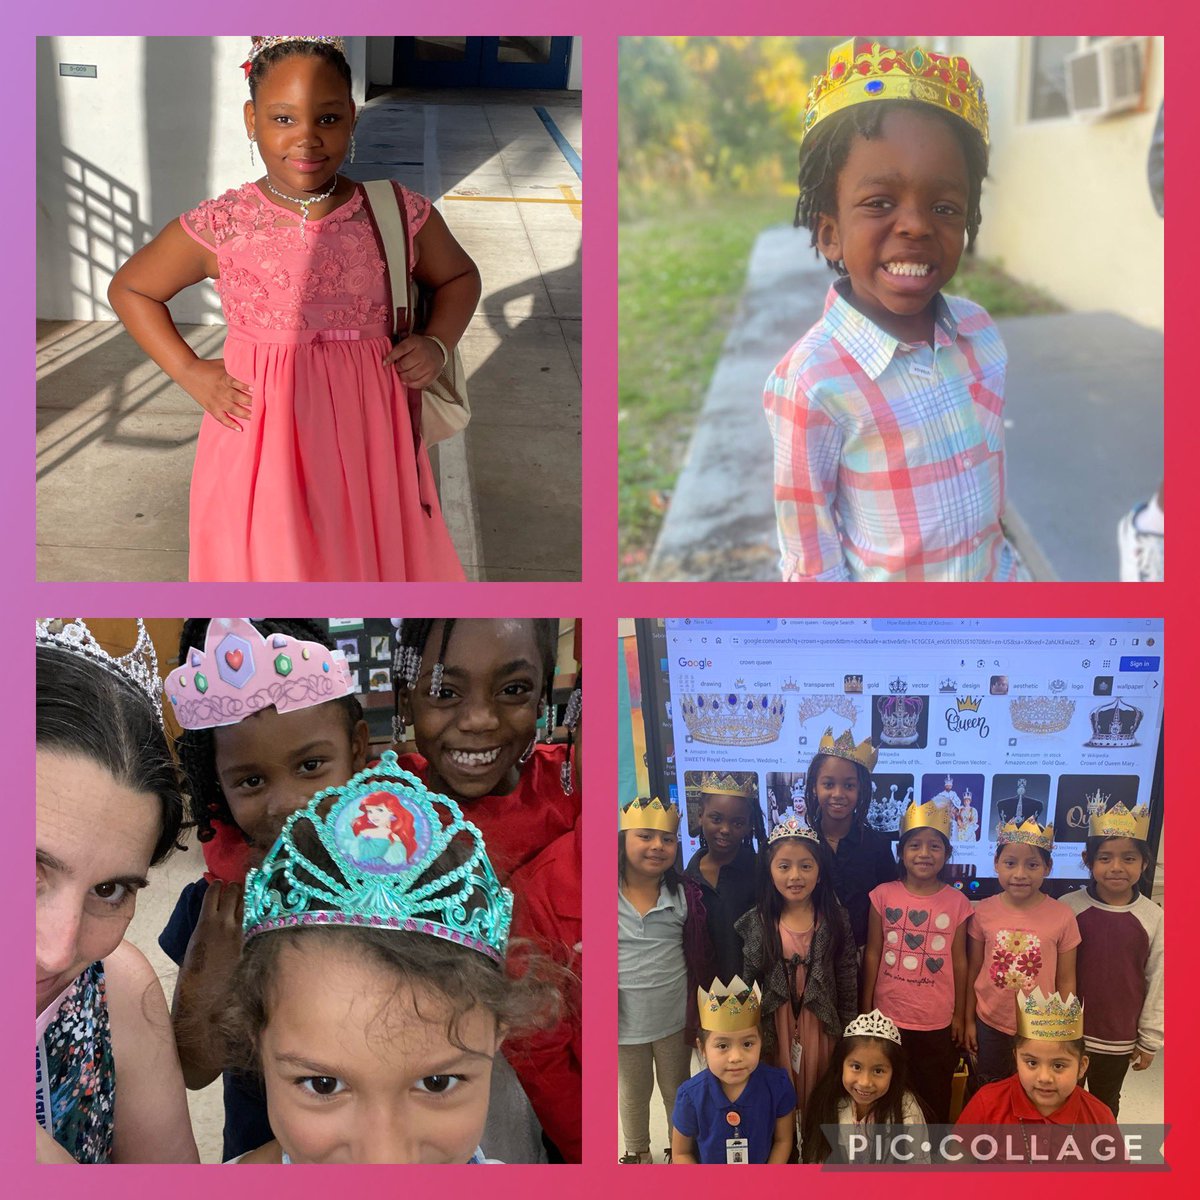 @NorthmoreElem Black History Spirit Week Day 3: Crowns and Tiaras! Everyone is highly favored no matter who you are! Look at all these gorgeous Panthers! @CPedraza_AP @JalisaGranger @JacobW_SSCC @Area4SuptPBCSD @pbcsd